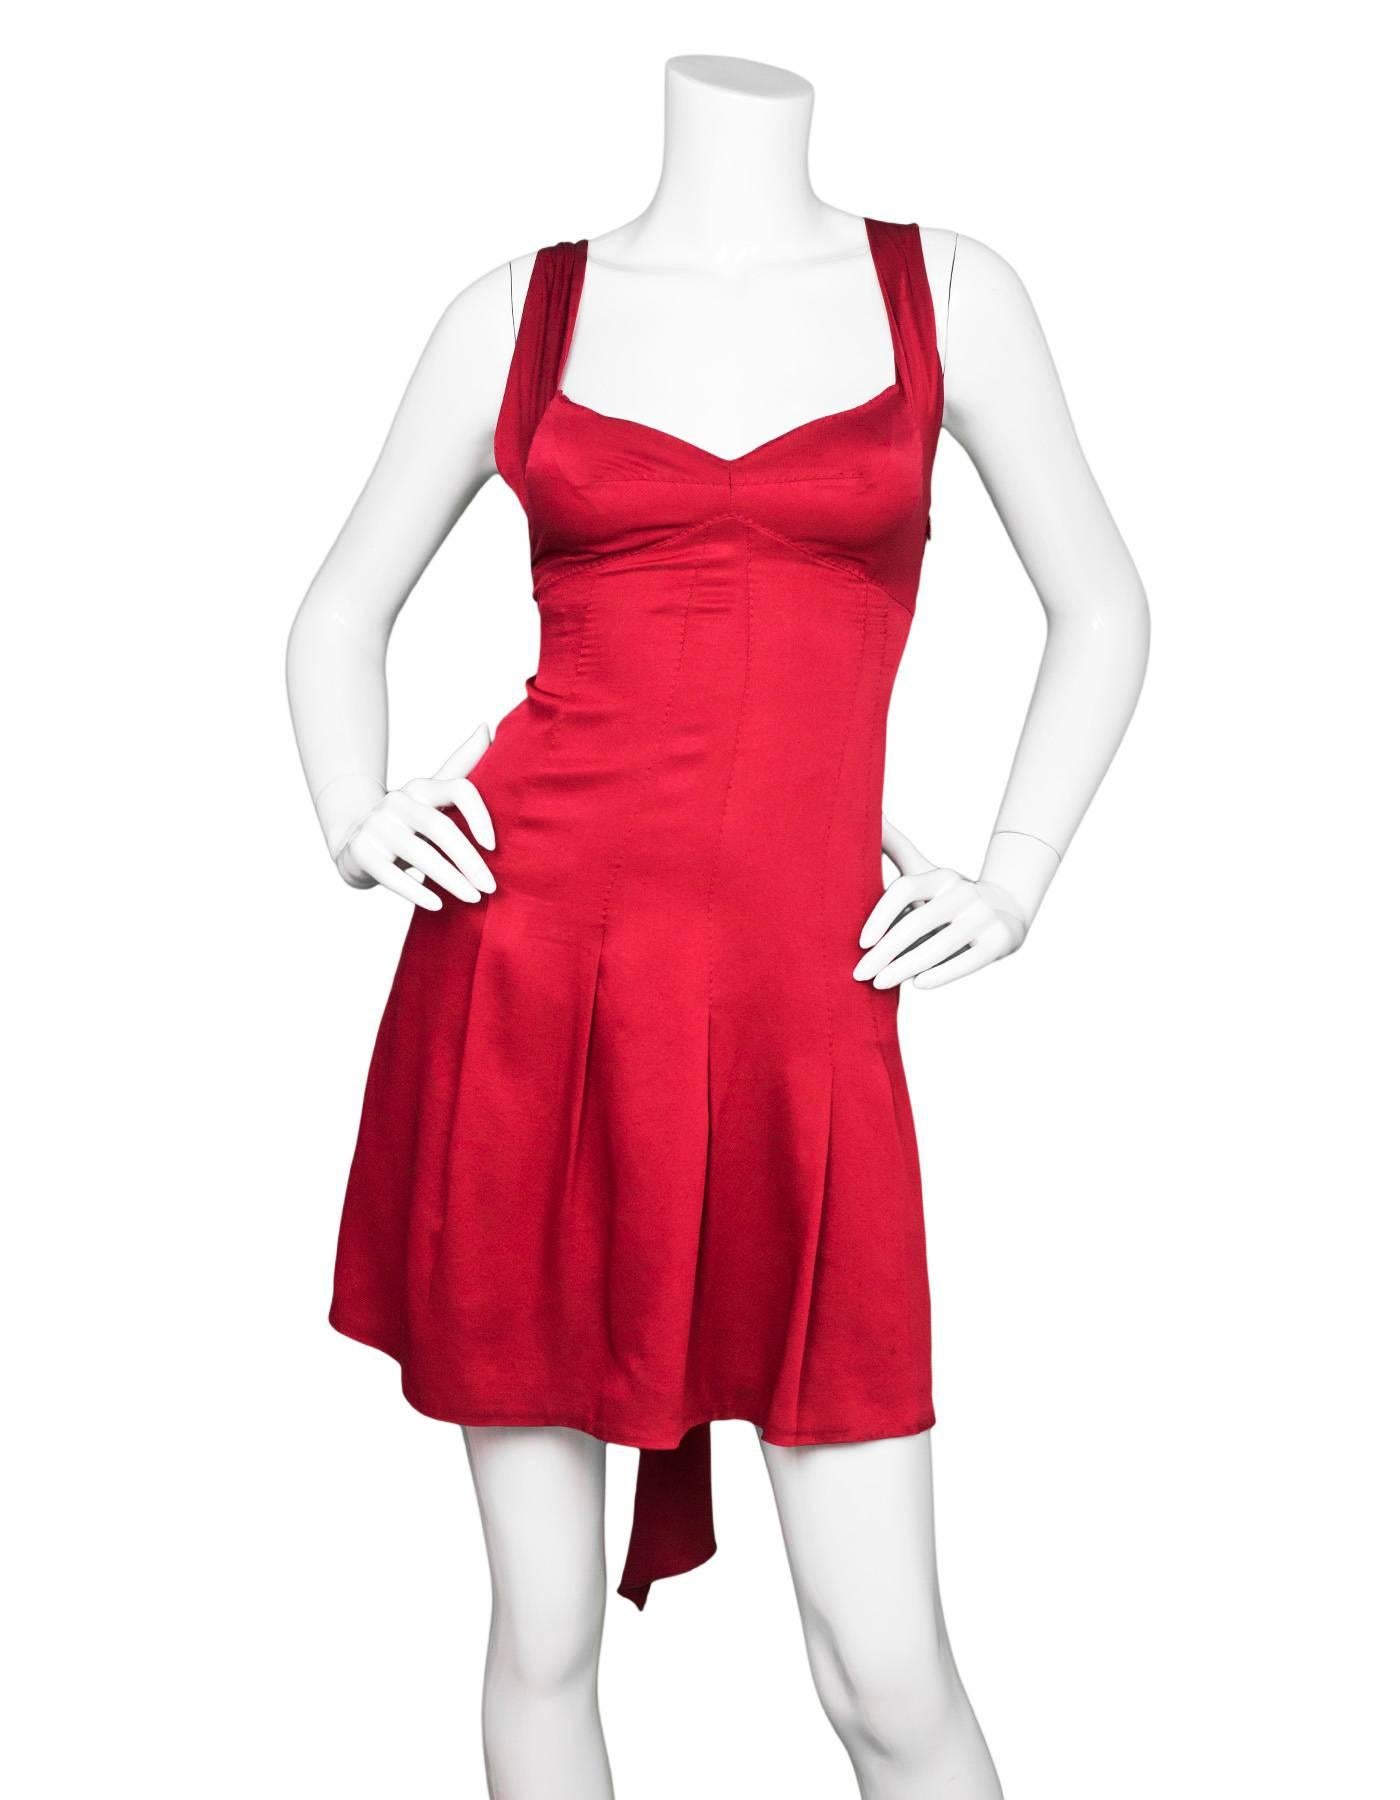 Moschino Brick Red Dress Sz US4
Features bow detail at back

Made In: Italy
Color: Brick red
Composition: Not listed, feels like silk
Lining: Red underslip
Closure/Opening: Hidden side zip closure
Overall Condition: Excellent pre-owned condition,